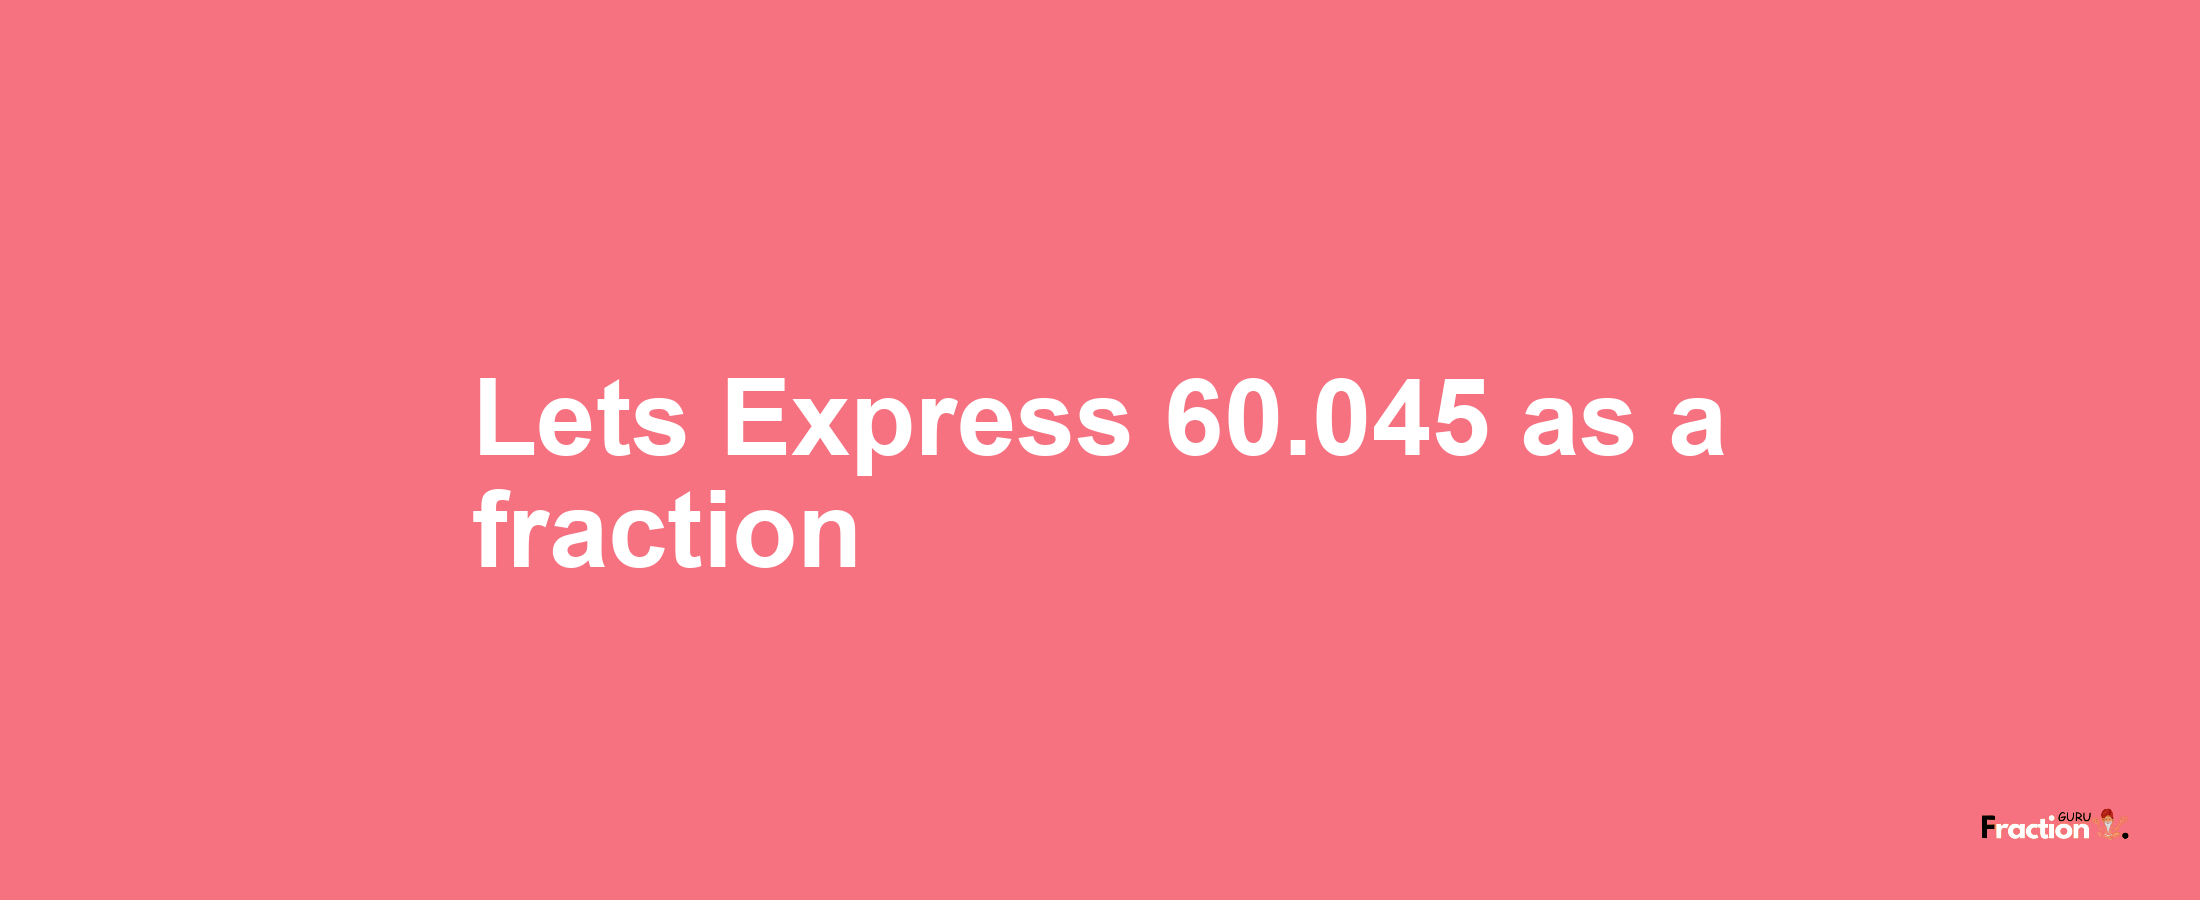 Lets Express 60.045 as afraction